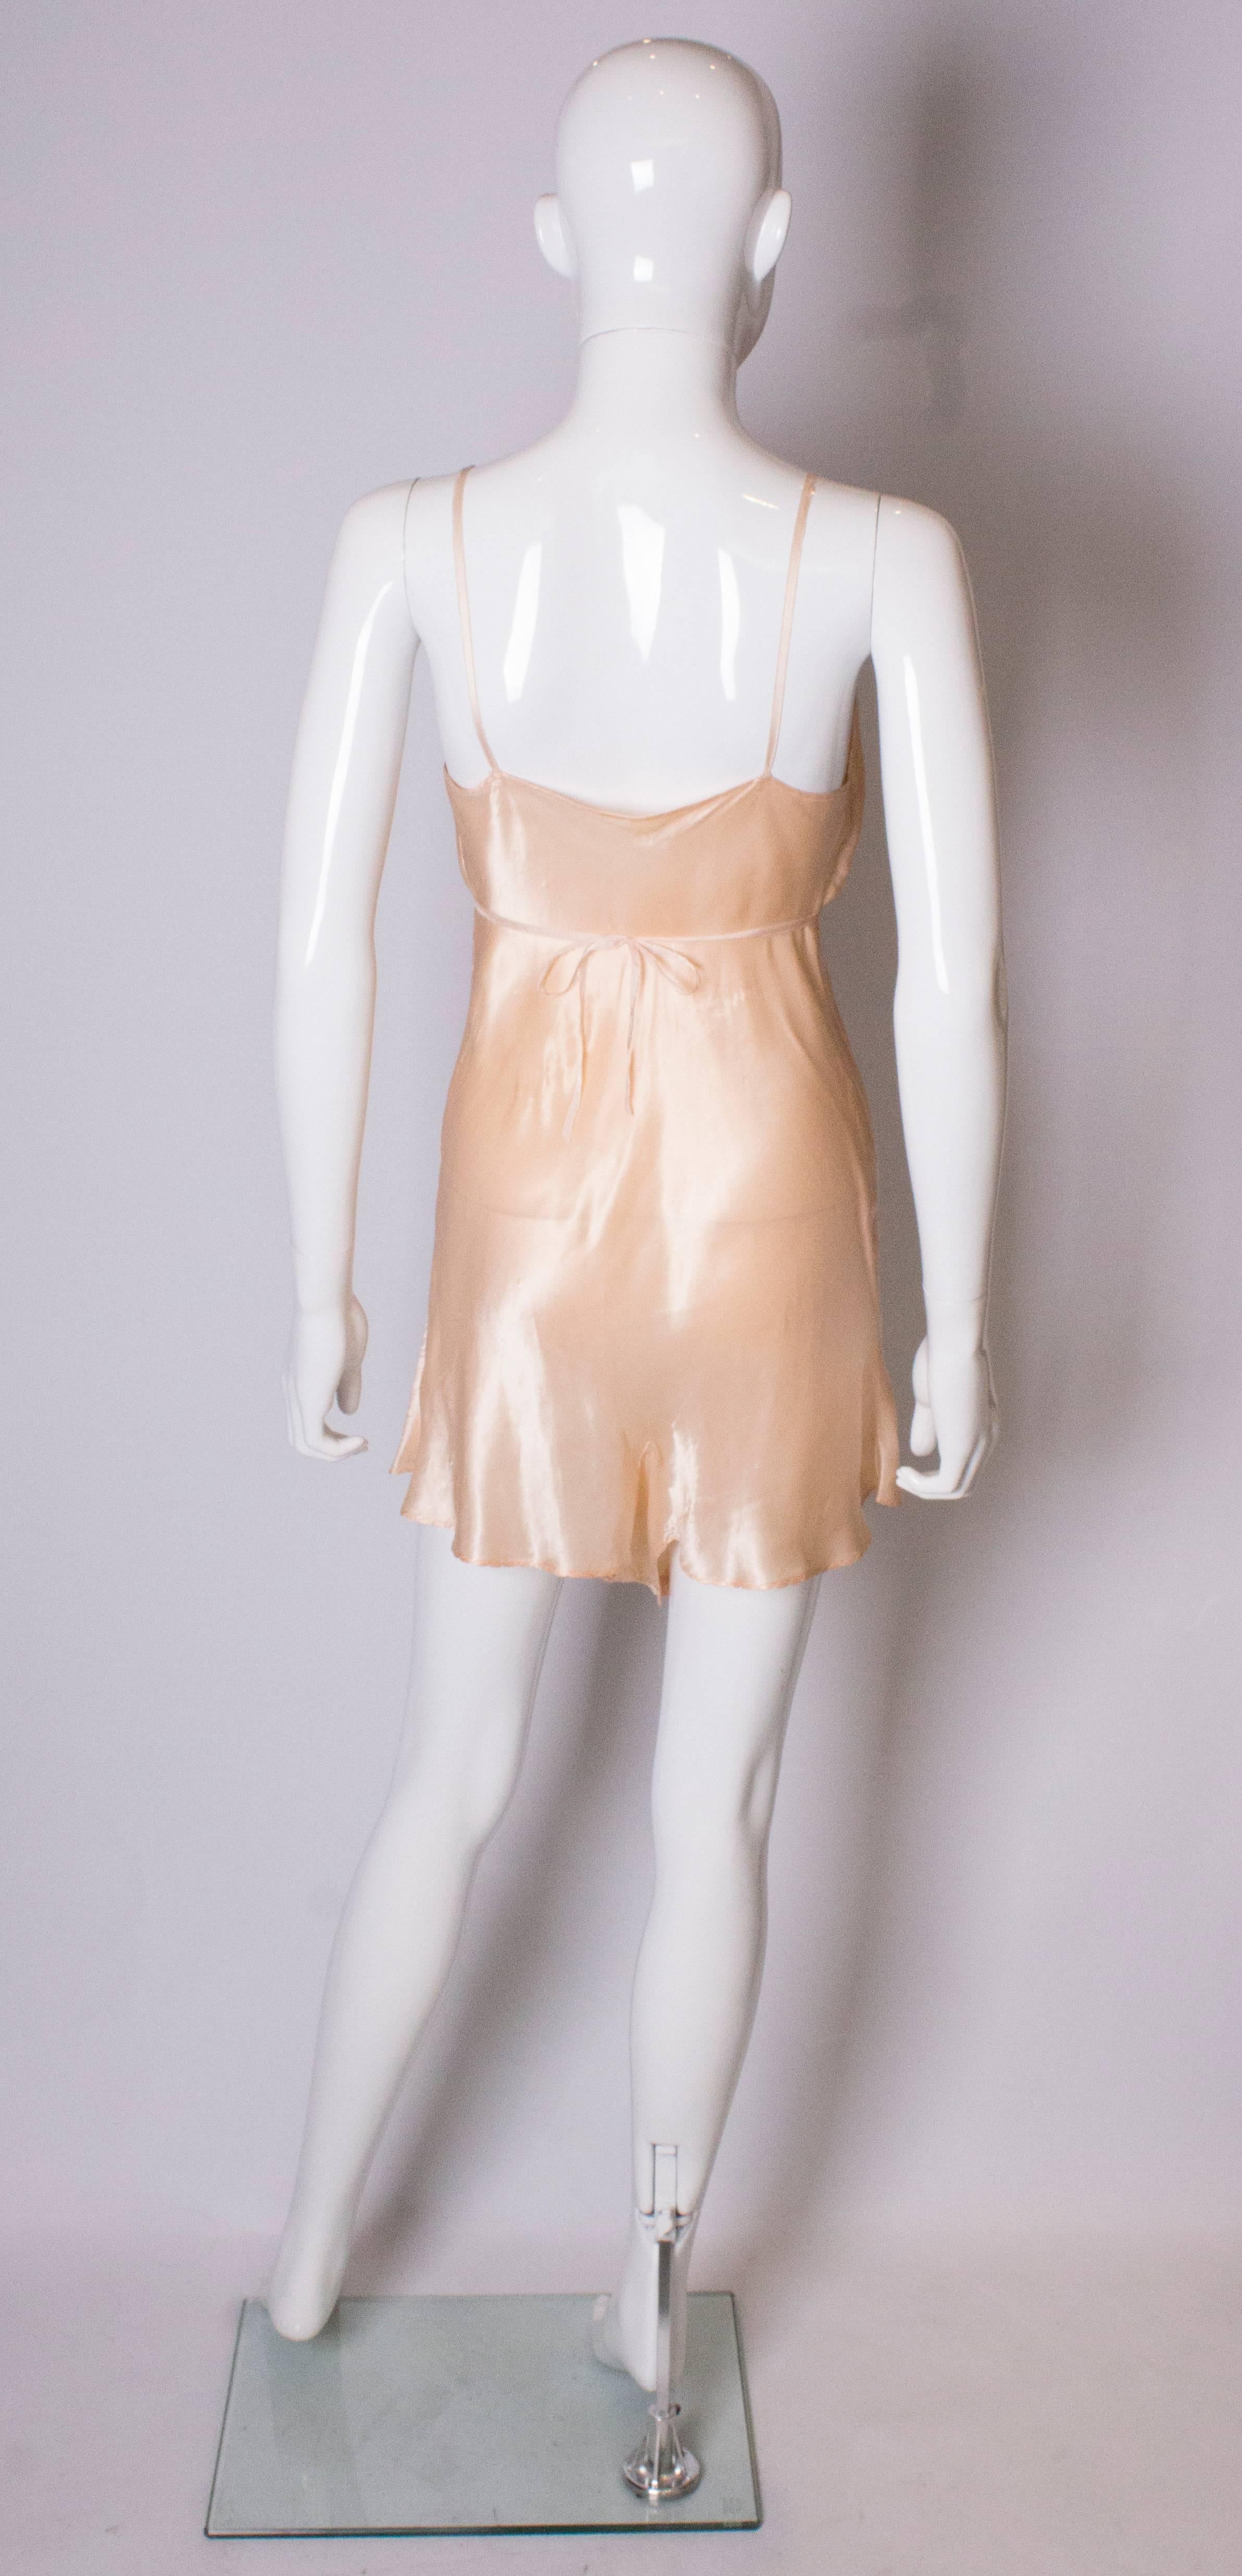 Women's Vintage Peach Satin Cami Nickers For Sale